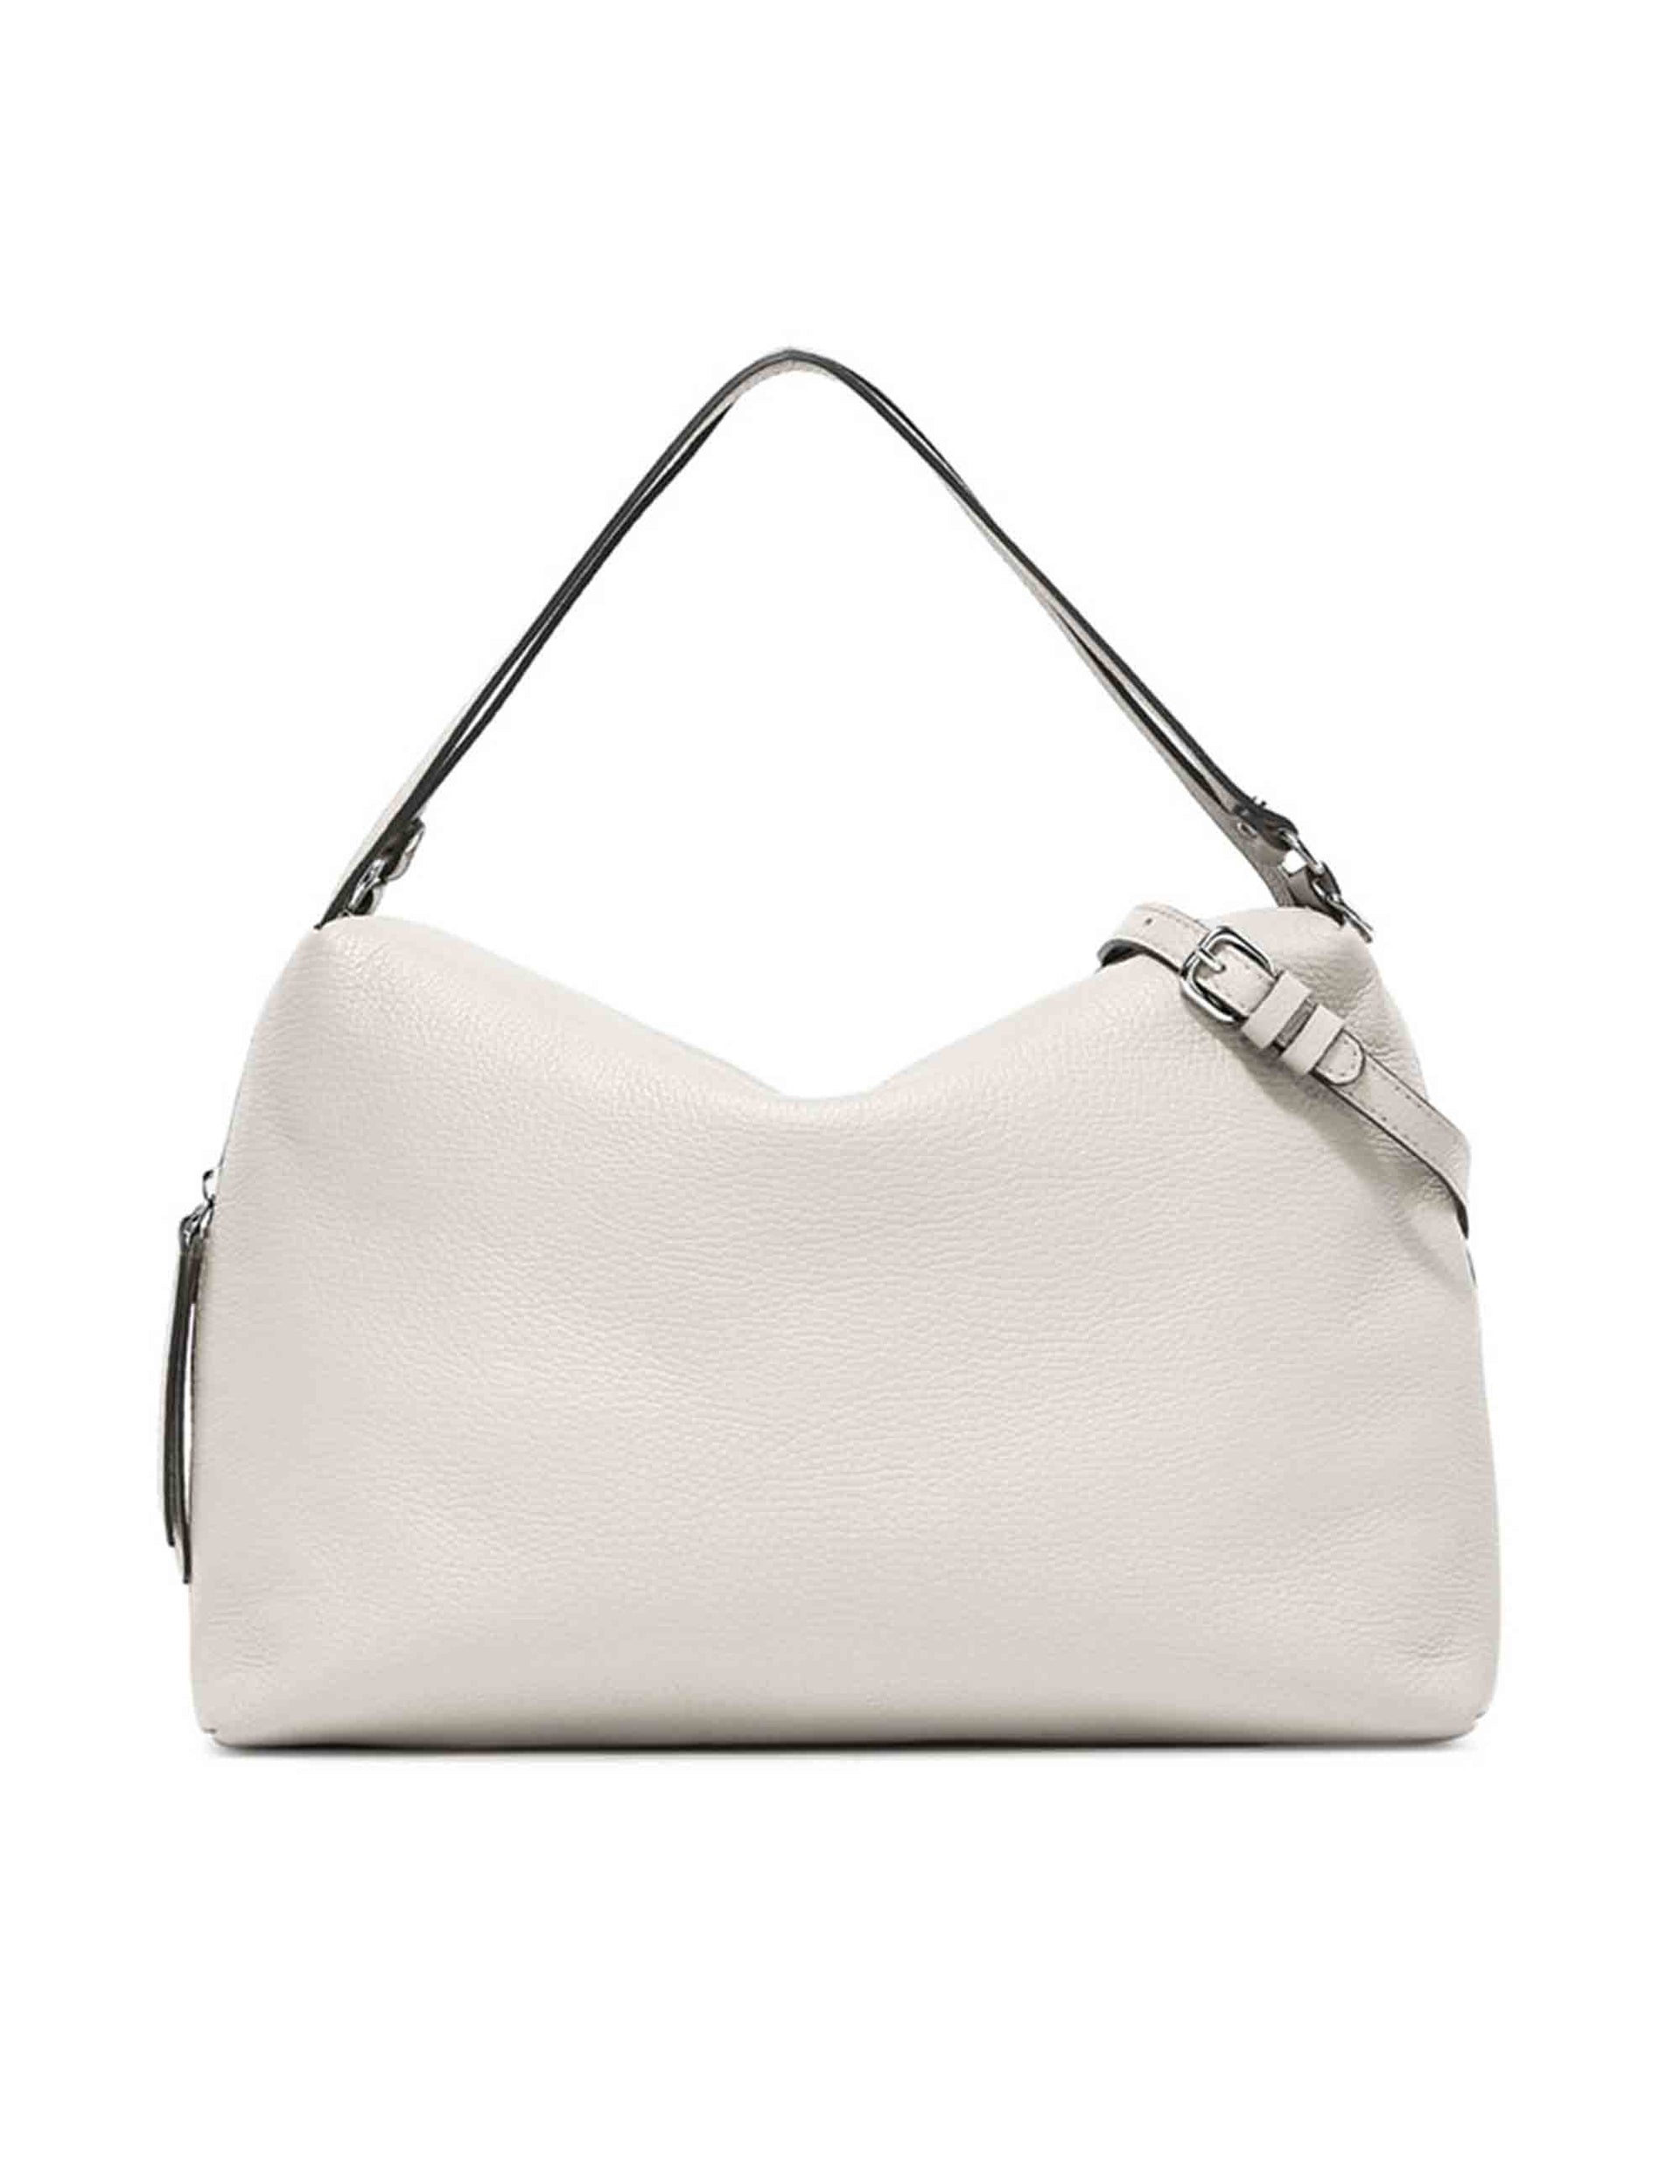 Alifa women's shoulder bags in cream leather with matching handles and shoulder strap